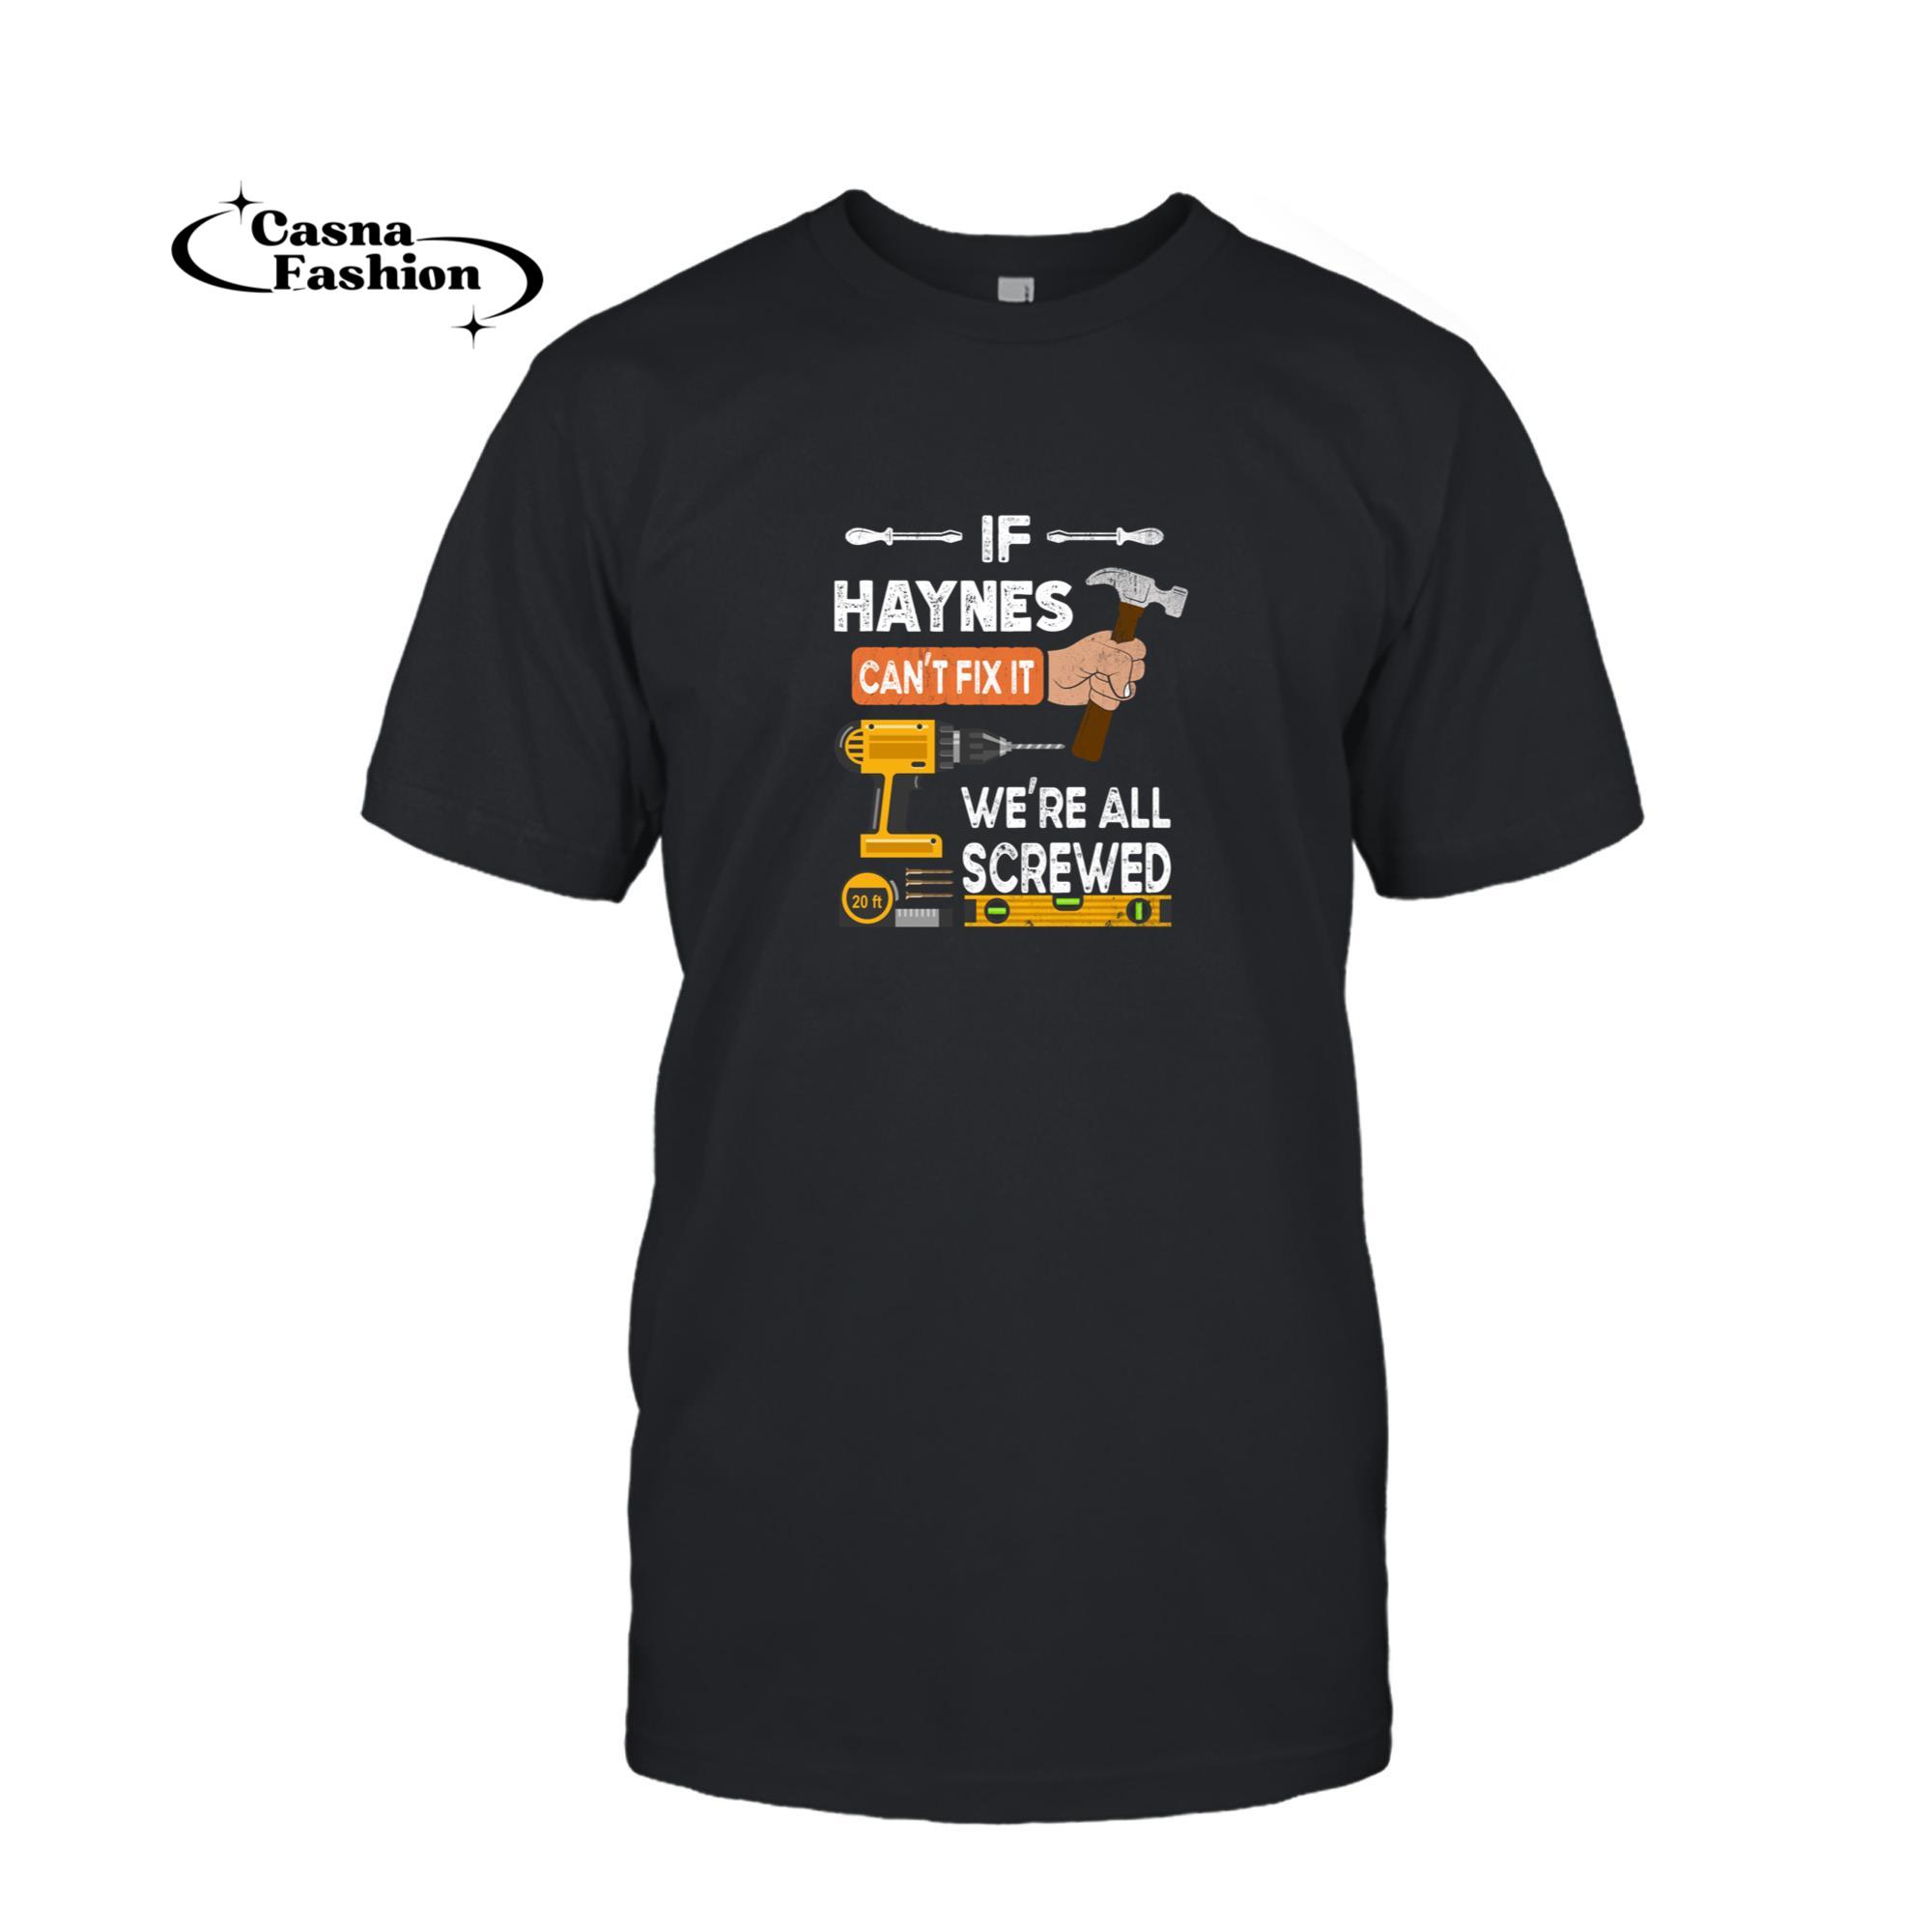 casnafashion_T-shirt_Funny if Haynes can't fix it no one can handyman carpenter Pullover Hoodie_T-shirt_Black